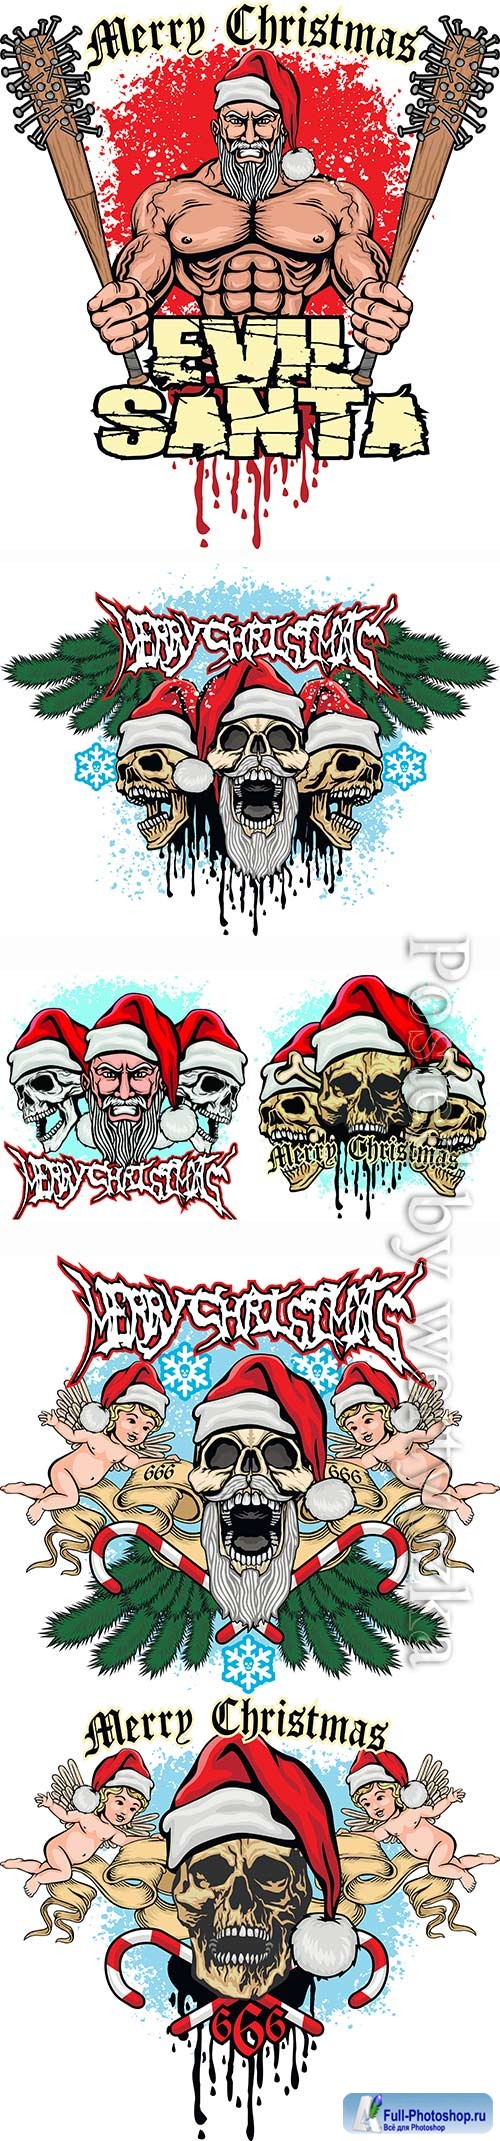 Xmas sign with skull and Santa Claus, grunge vintage design 